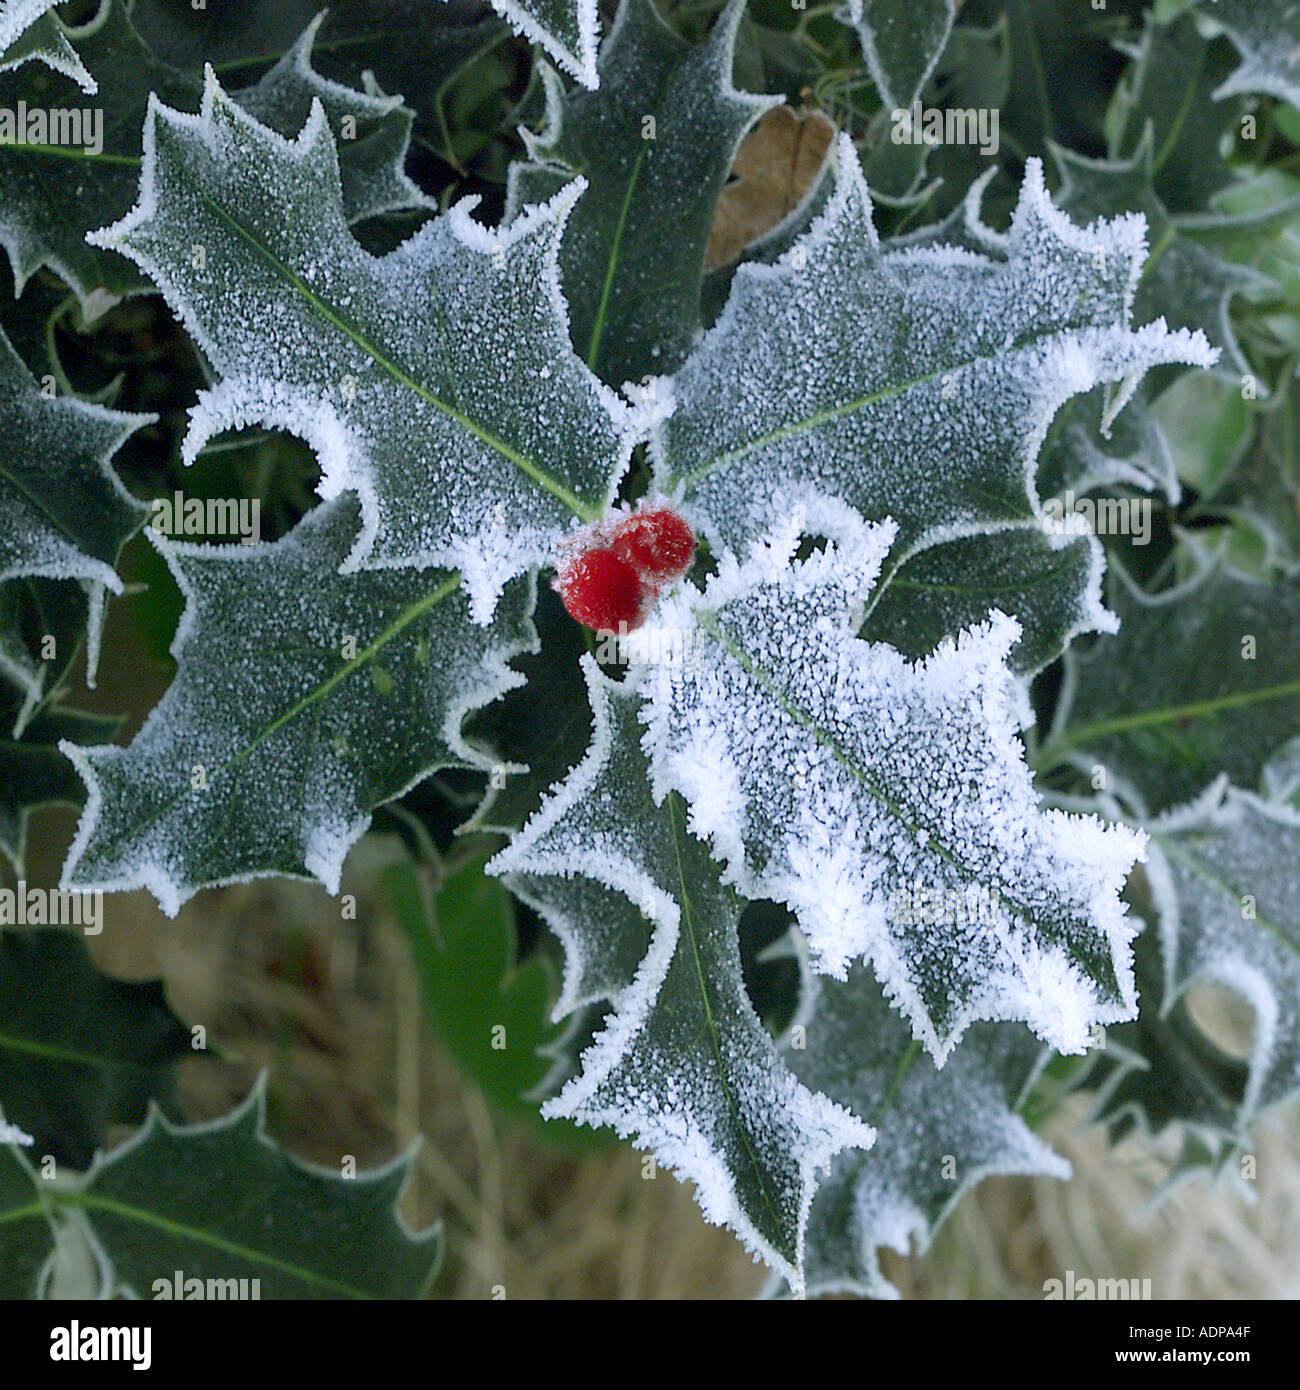 Frosted holly leaves with berries Stock Photo